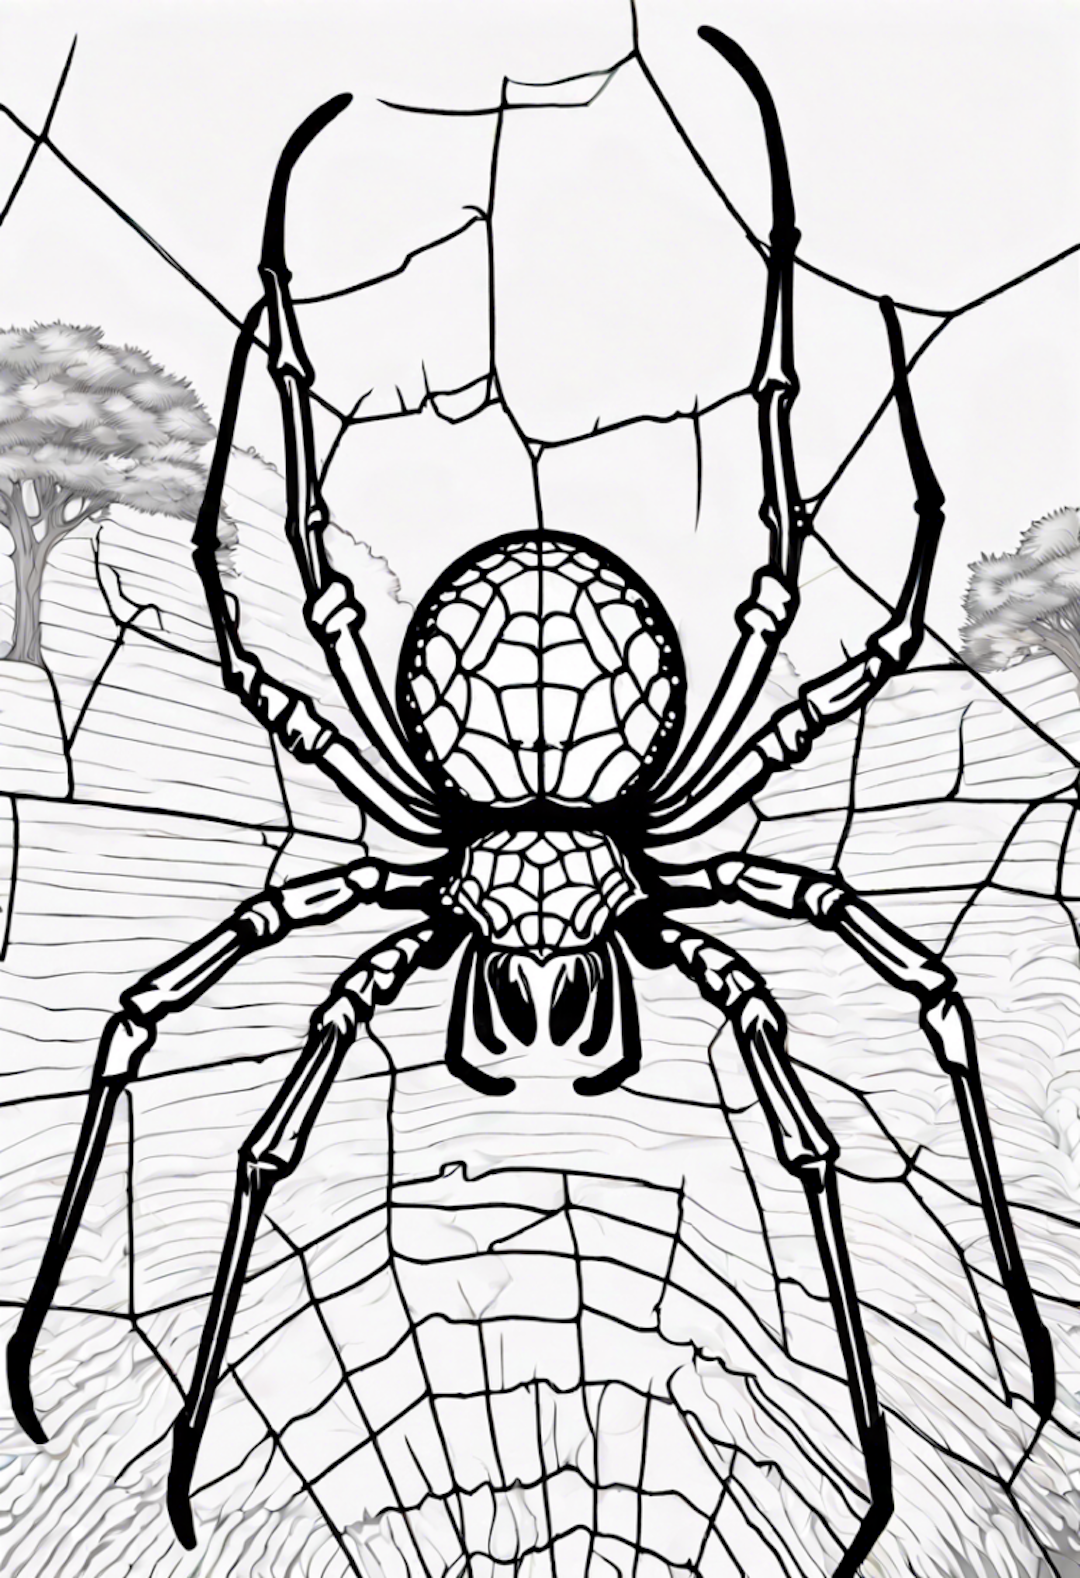 Spider in its Web Coloring Page coloring pages